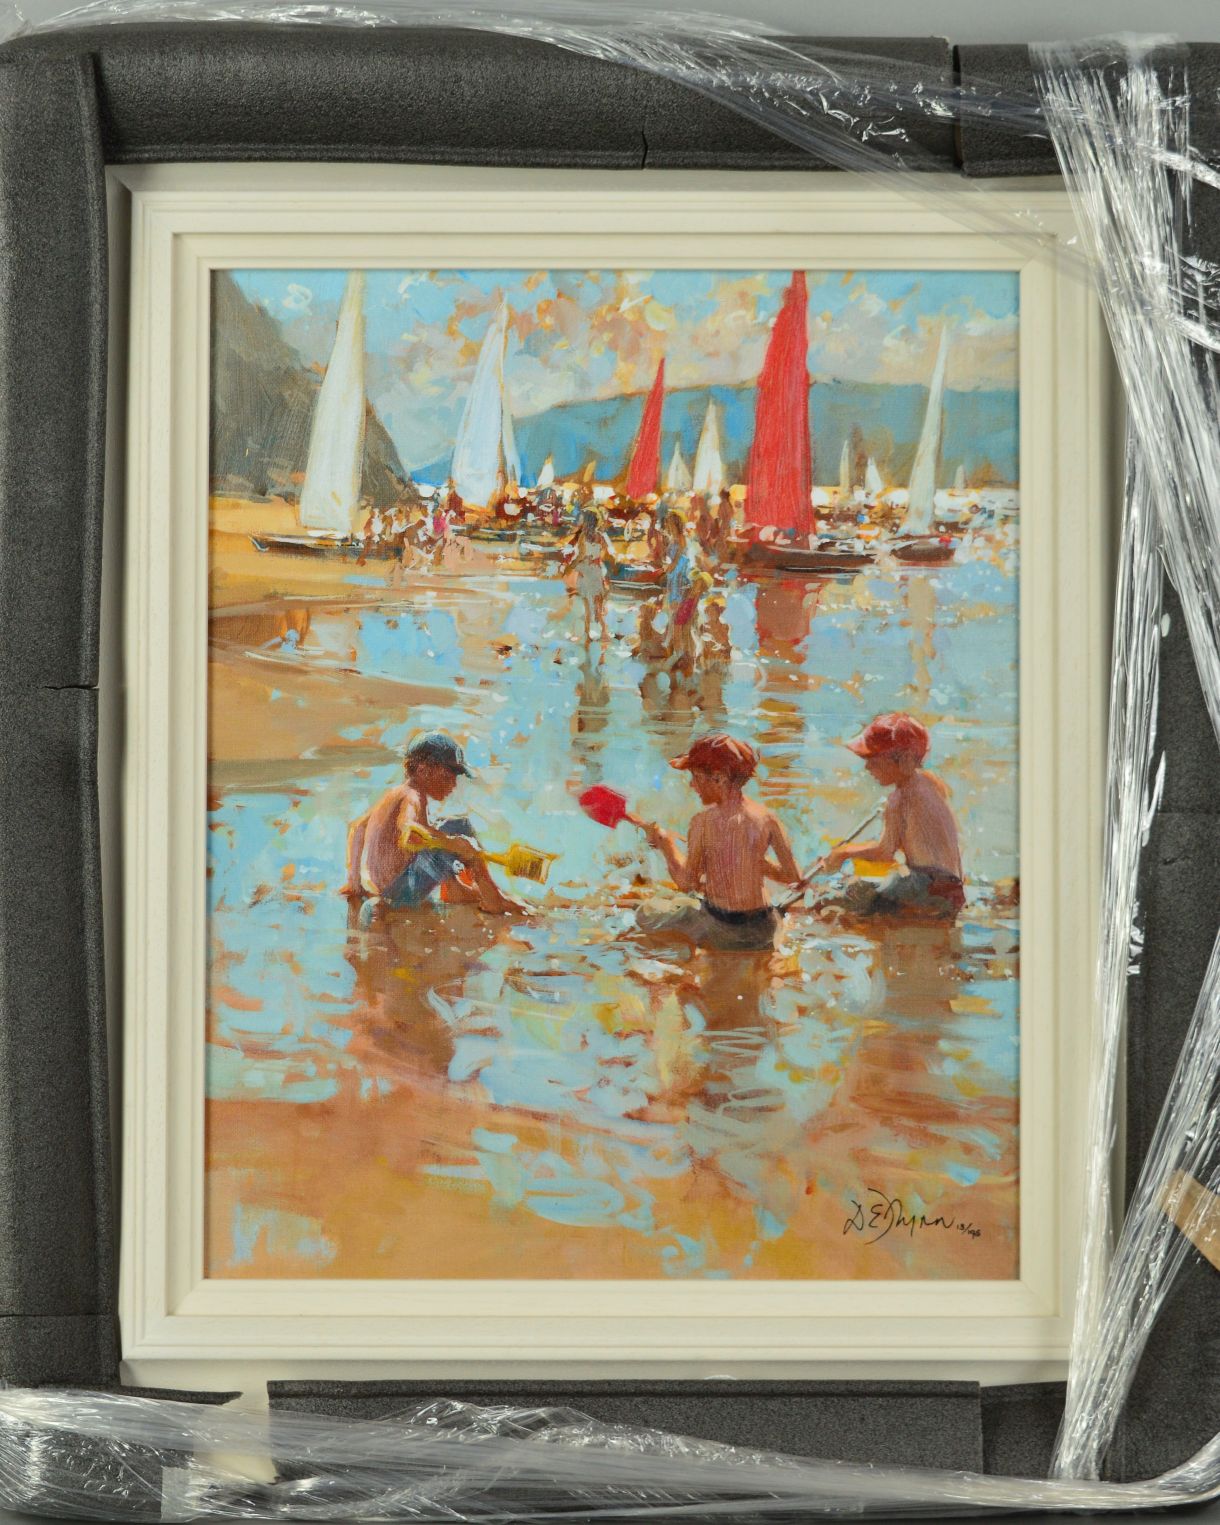 DIANNE FLYN 'WATERS EDGE', a limited edition hand embellished print on board 13/195, children